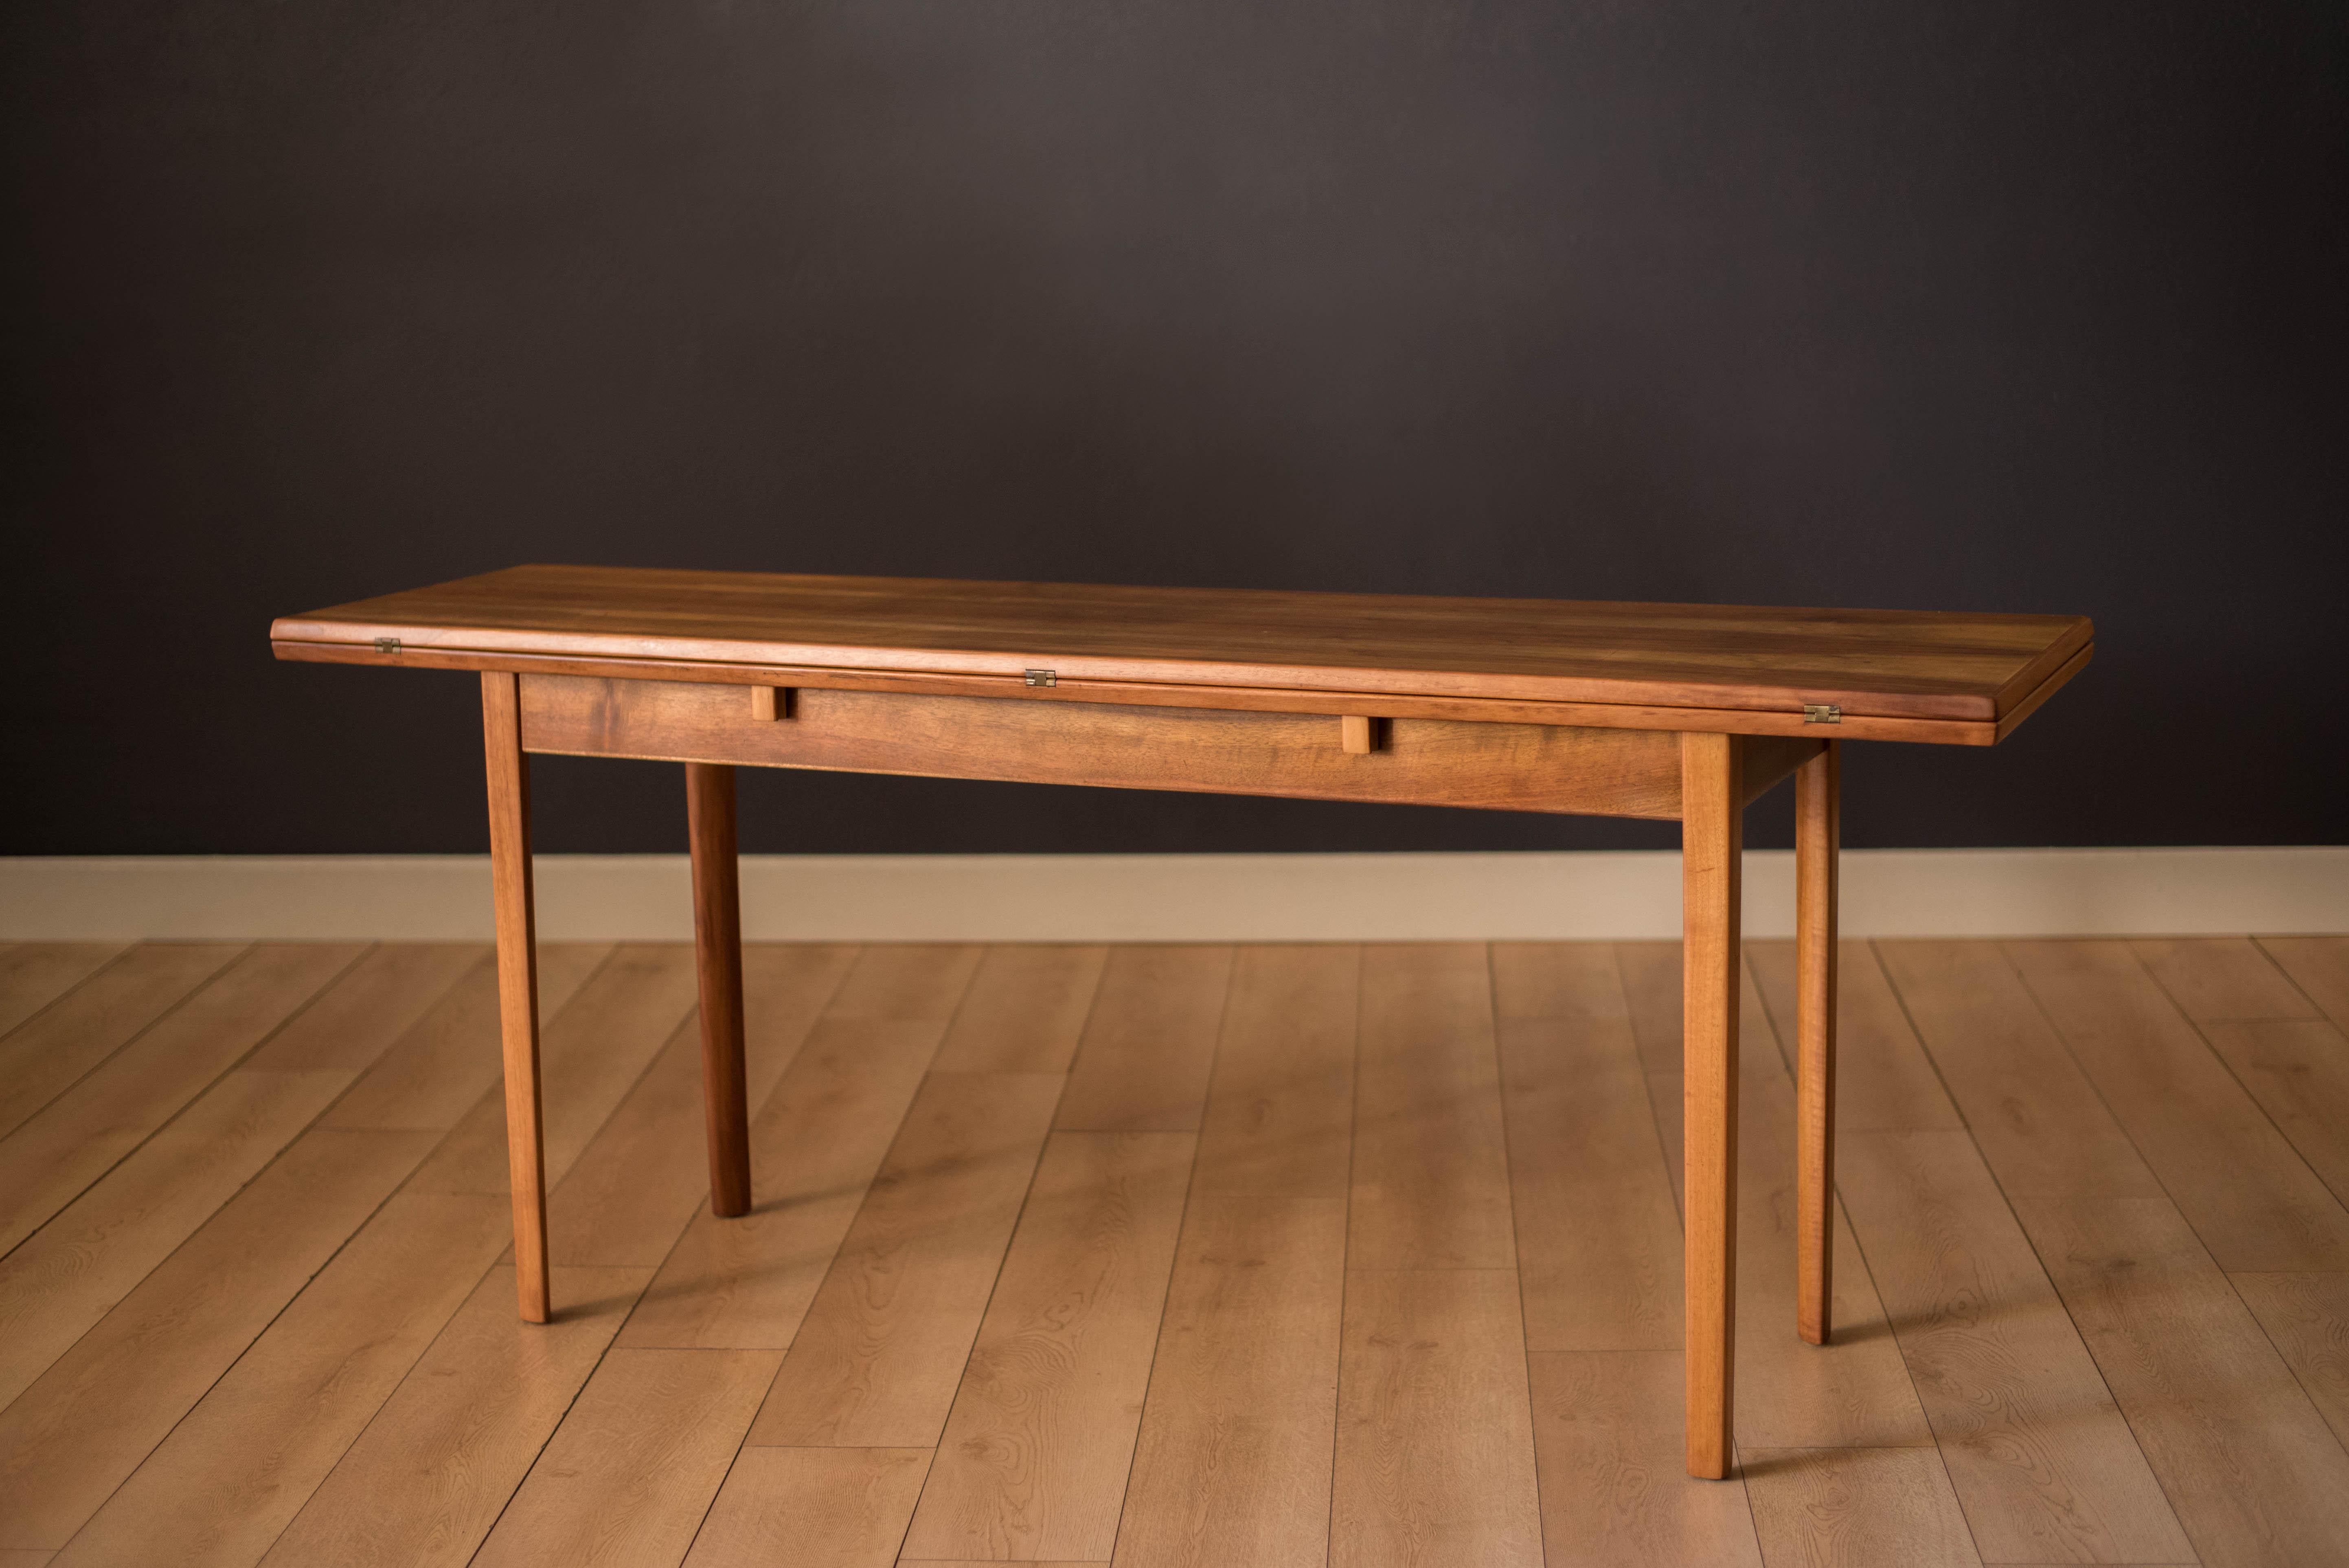 Vintage Scandinavian extending console table in walnut circa 1960's. This clever design features an expanding flip top that slides over converting the console into a dining table. Equipped with brass hinges and curved tapered legs, this versatile